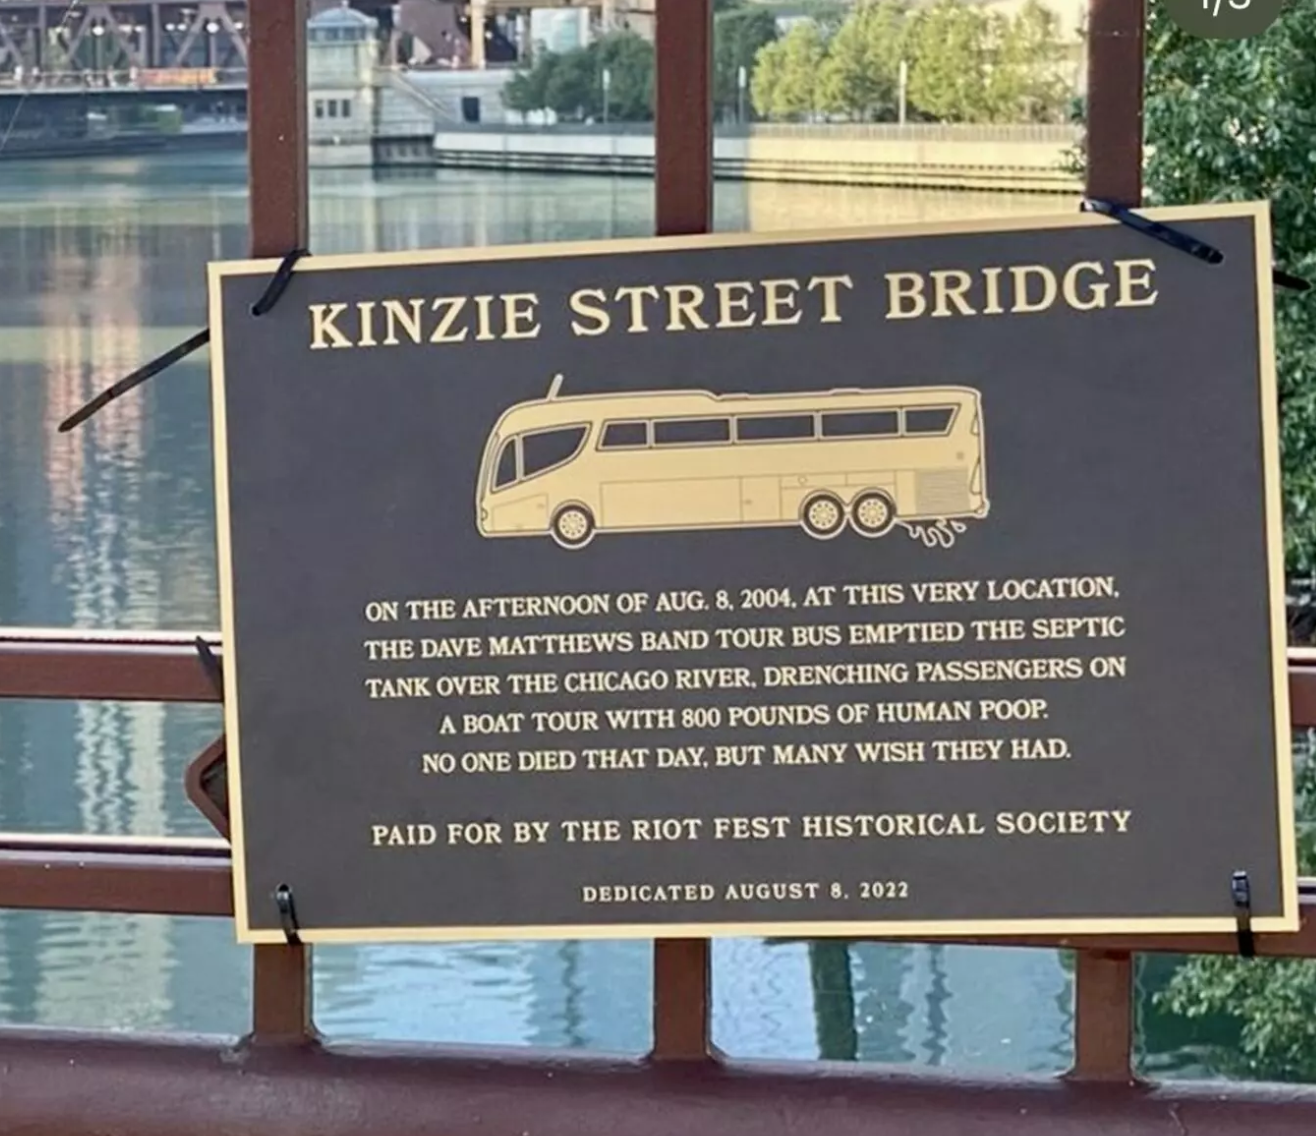 dave matthews band incident - Kinzie Street Bridge On The Afternoon Of Aug. 8, 2004, At This Very Location. The Dave Matthews Band Tour Bus Emptied The Septic Tank Over The Chicago River, Drenching Passengers On A Boat Tour With 800 Pounds Of Human Poop. 